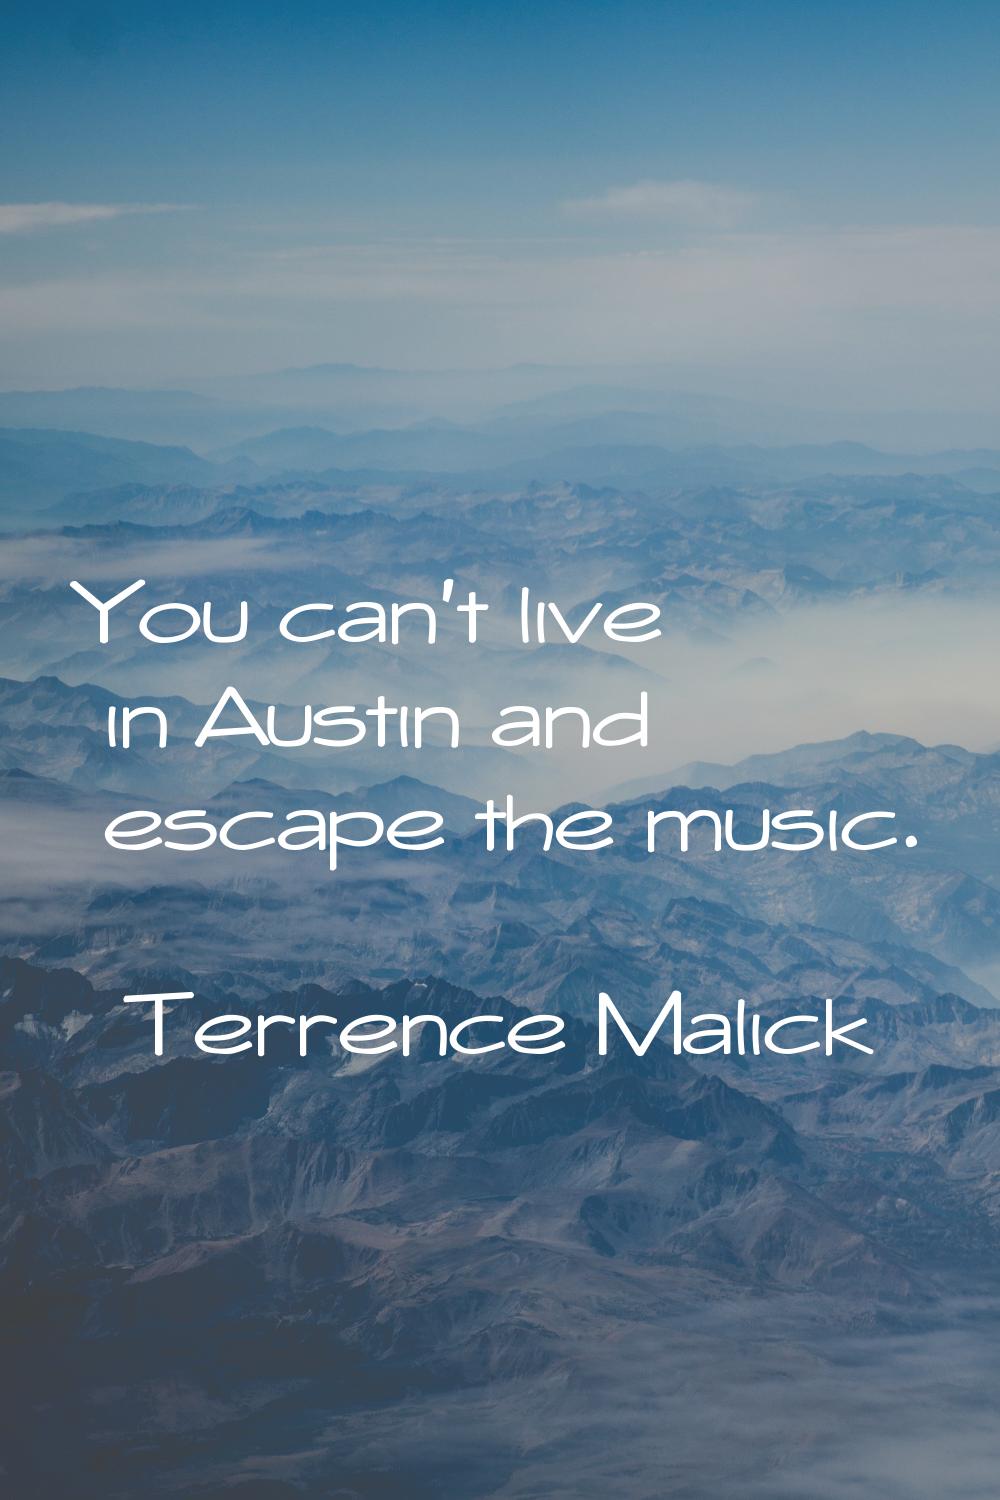 You can't live in Austin and escape the music.